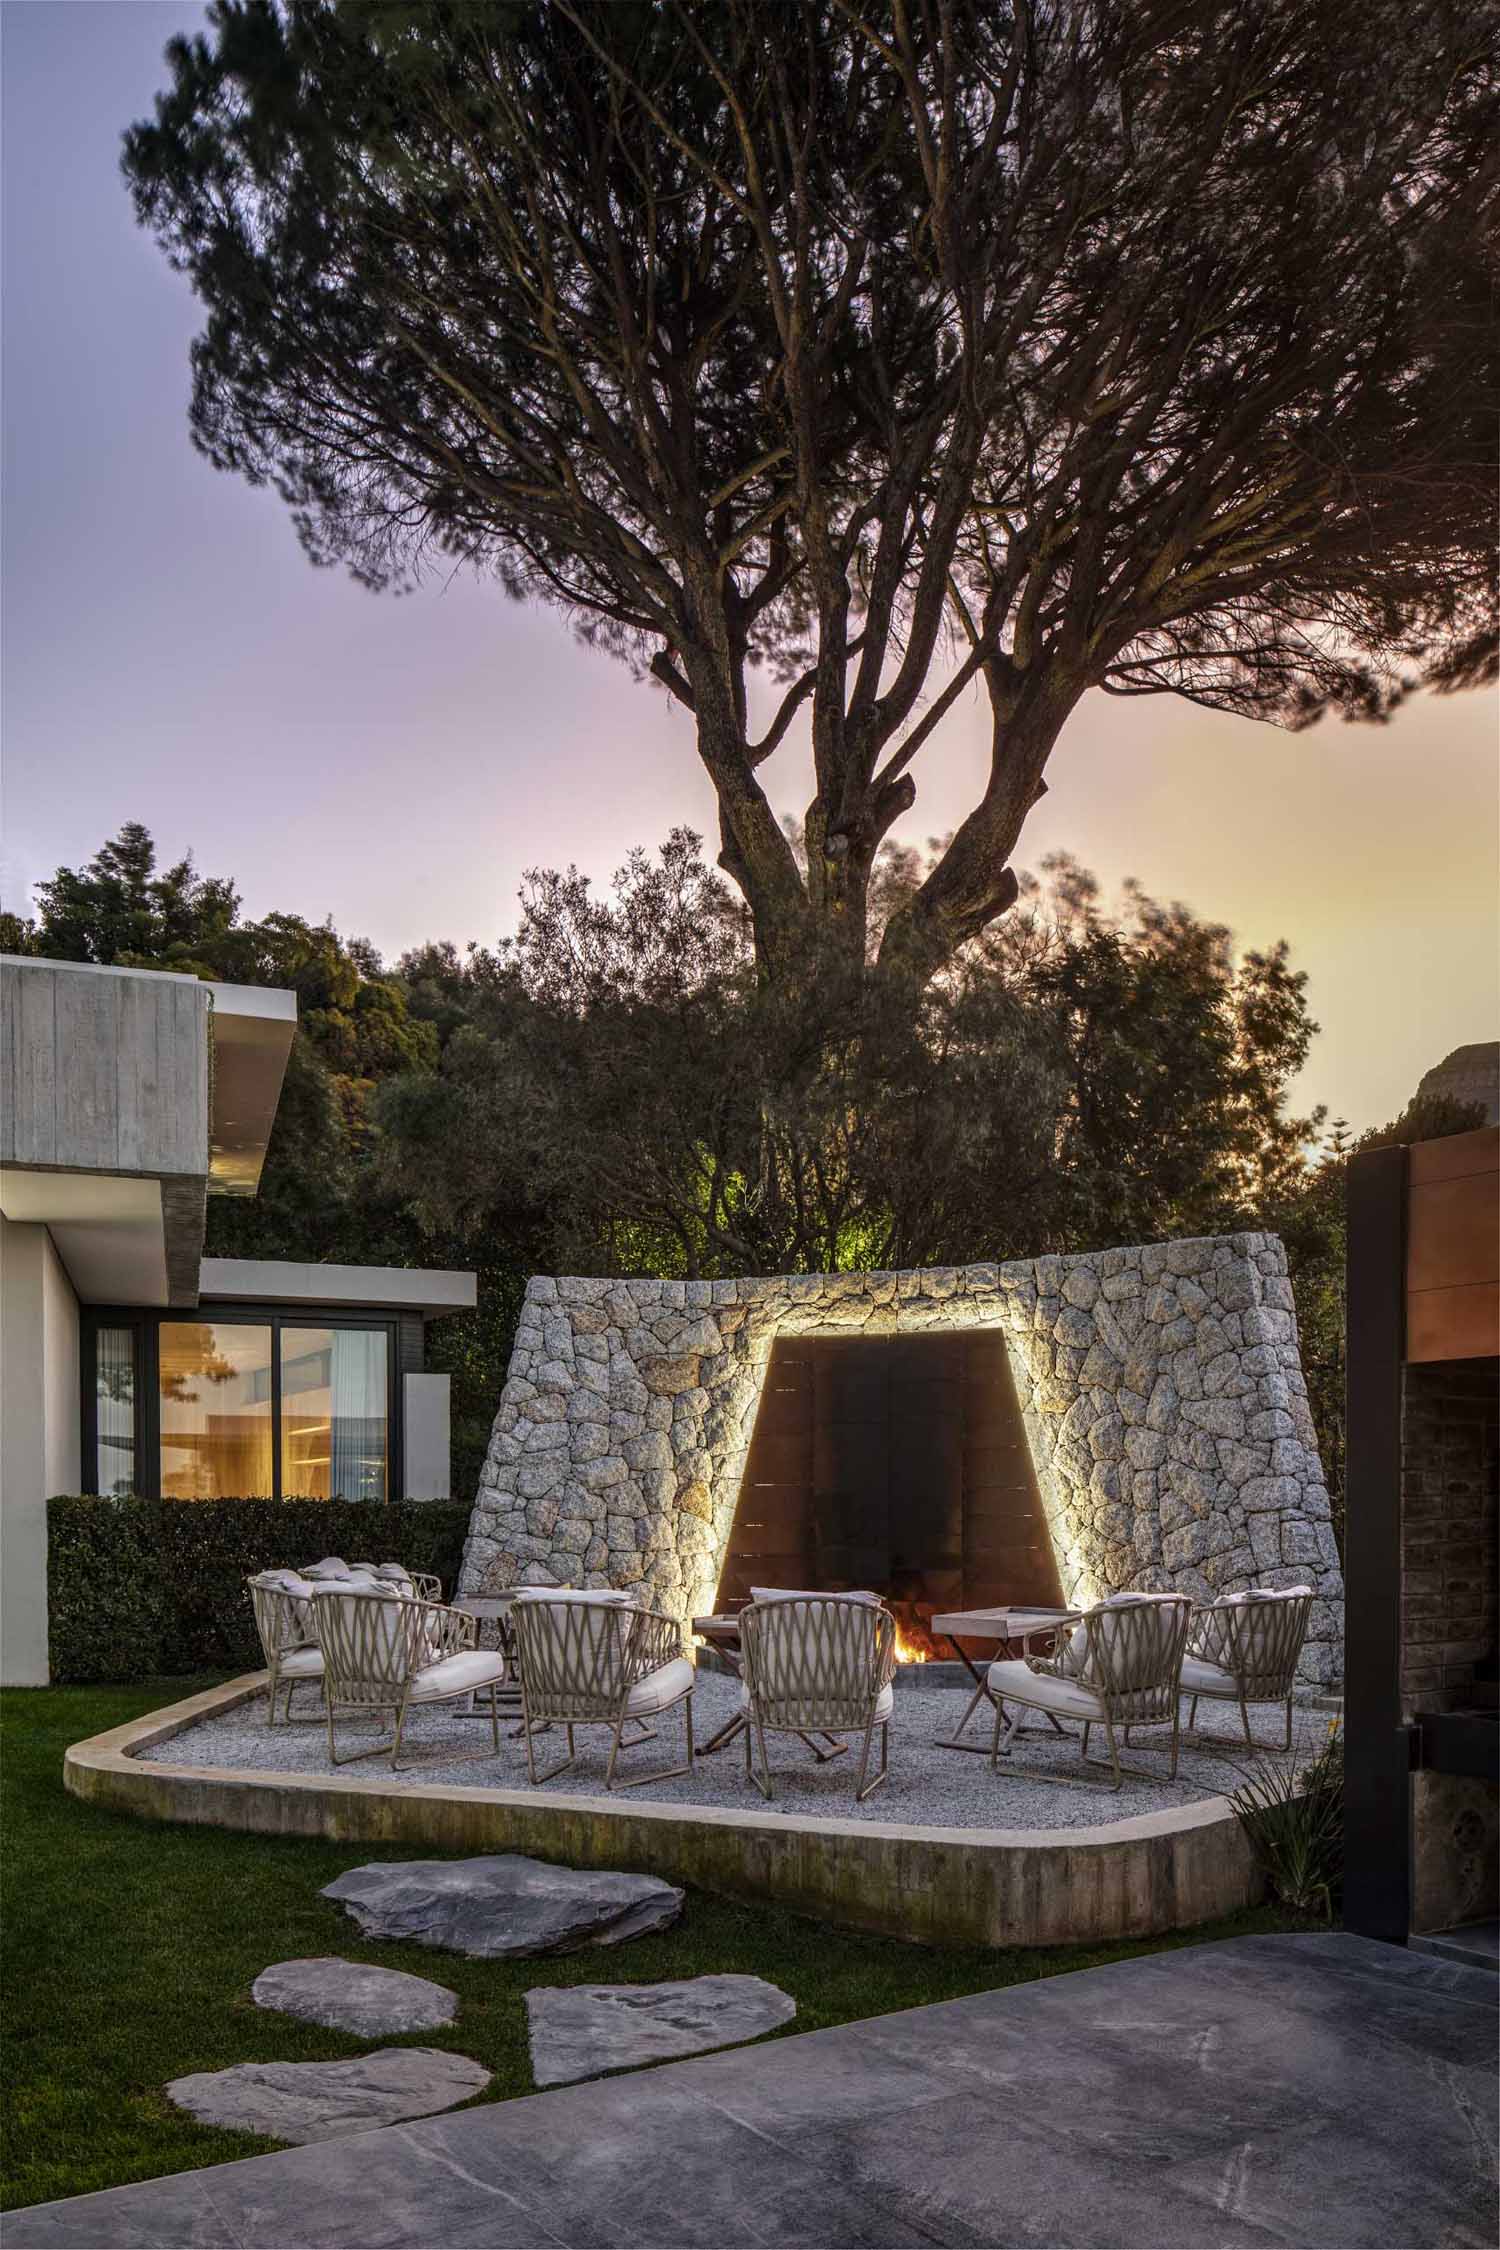 An outdoor fireplace with stone and steel backdrop and seating.